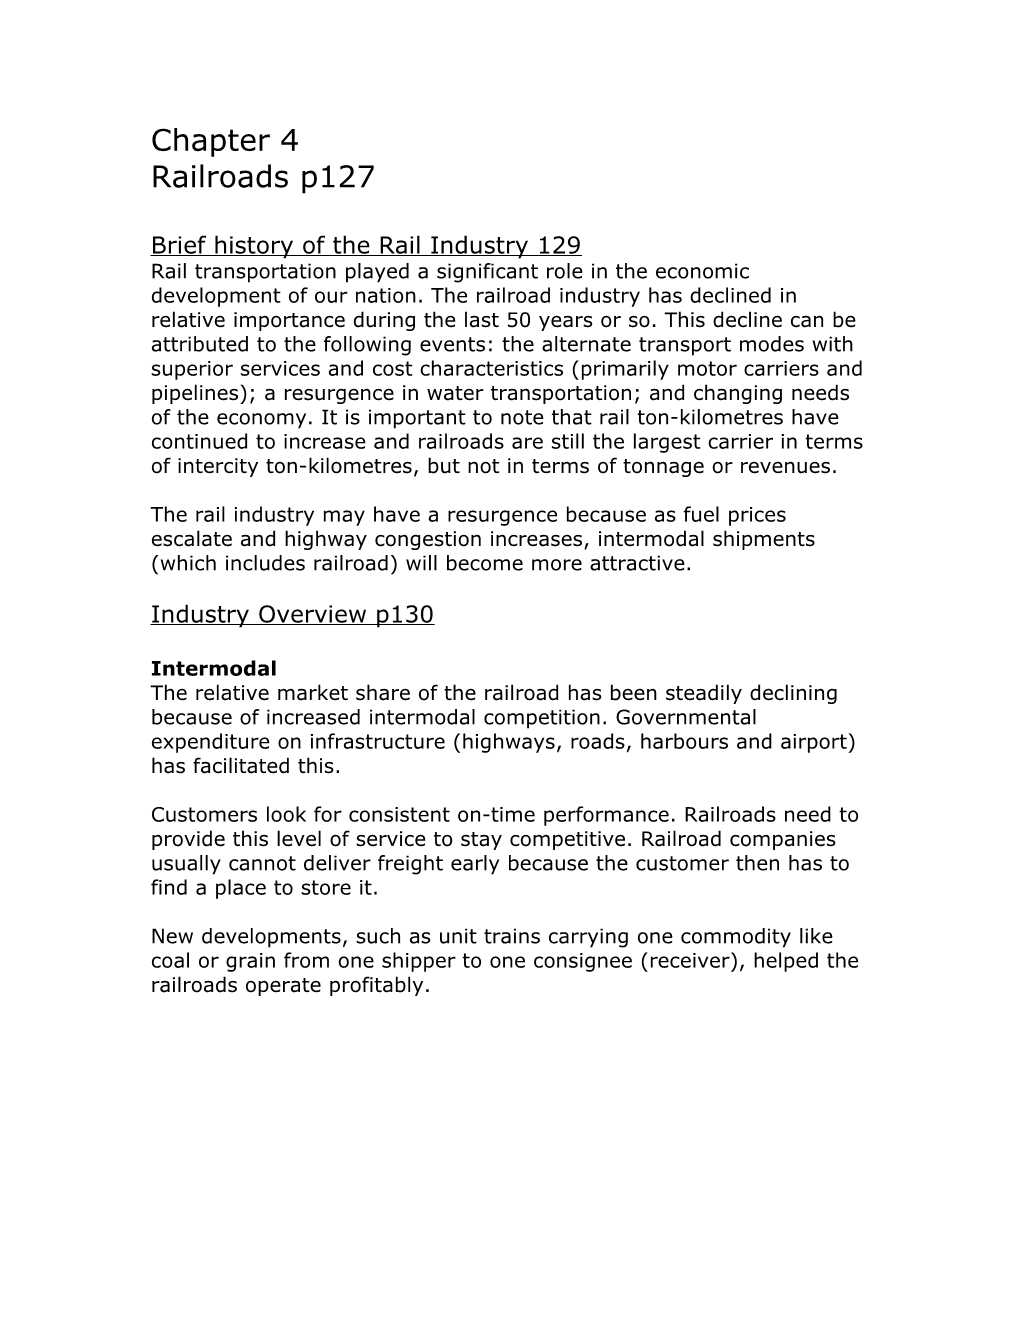 Brief History of the Rail Industry 129